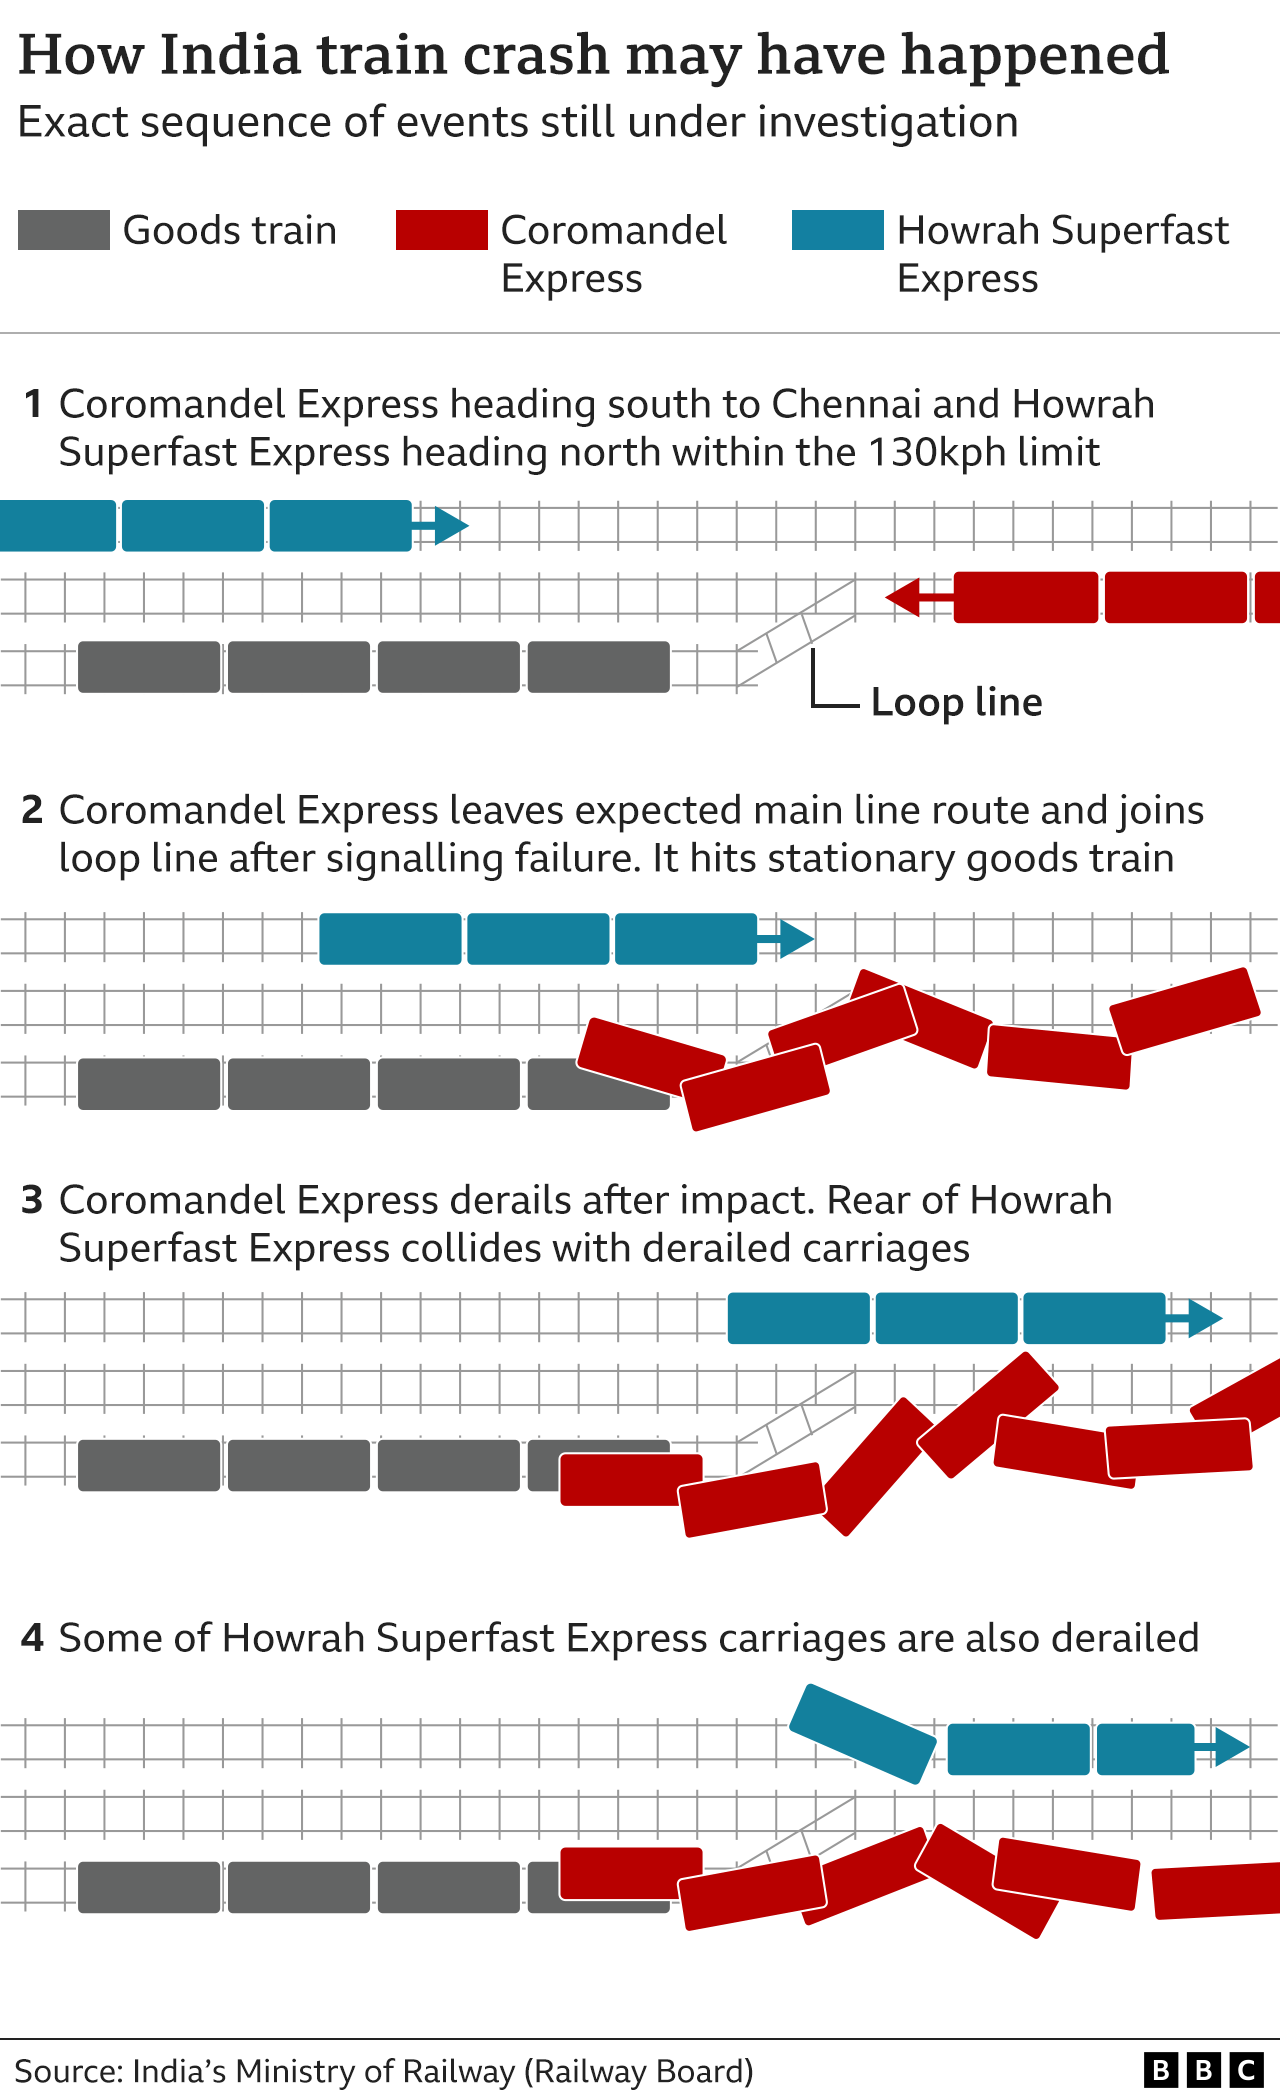 How the train crash may have  happened 